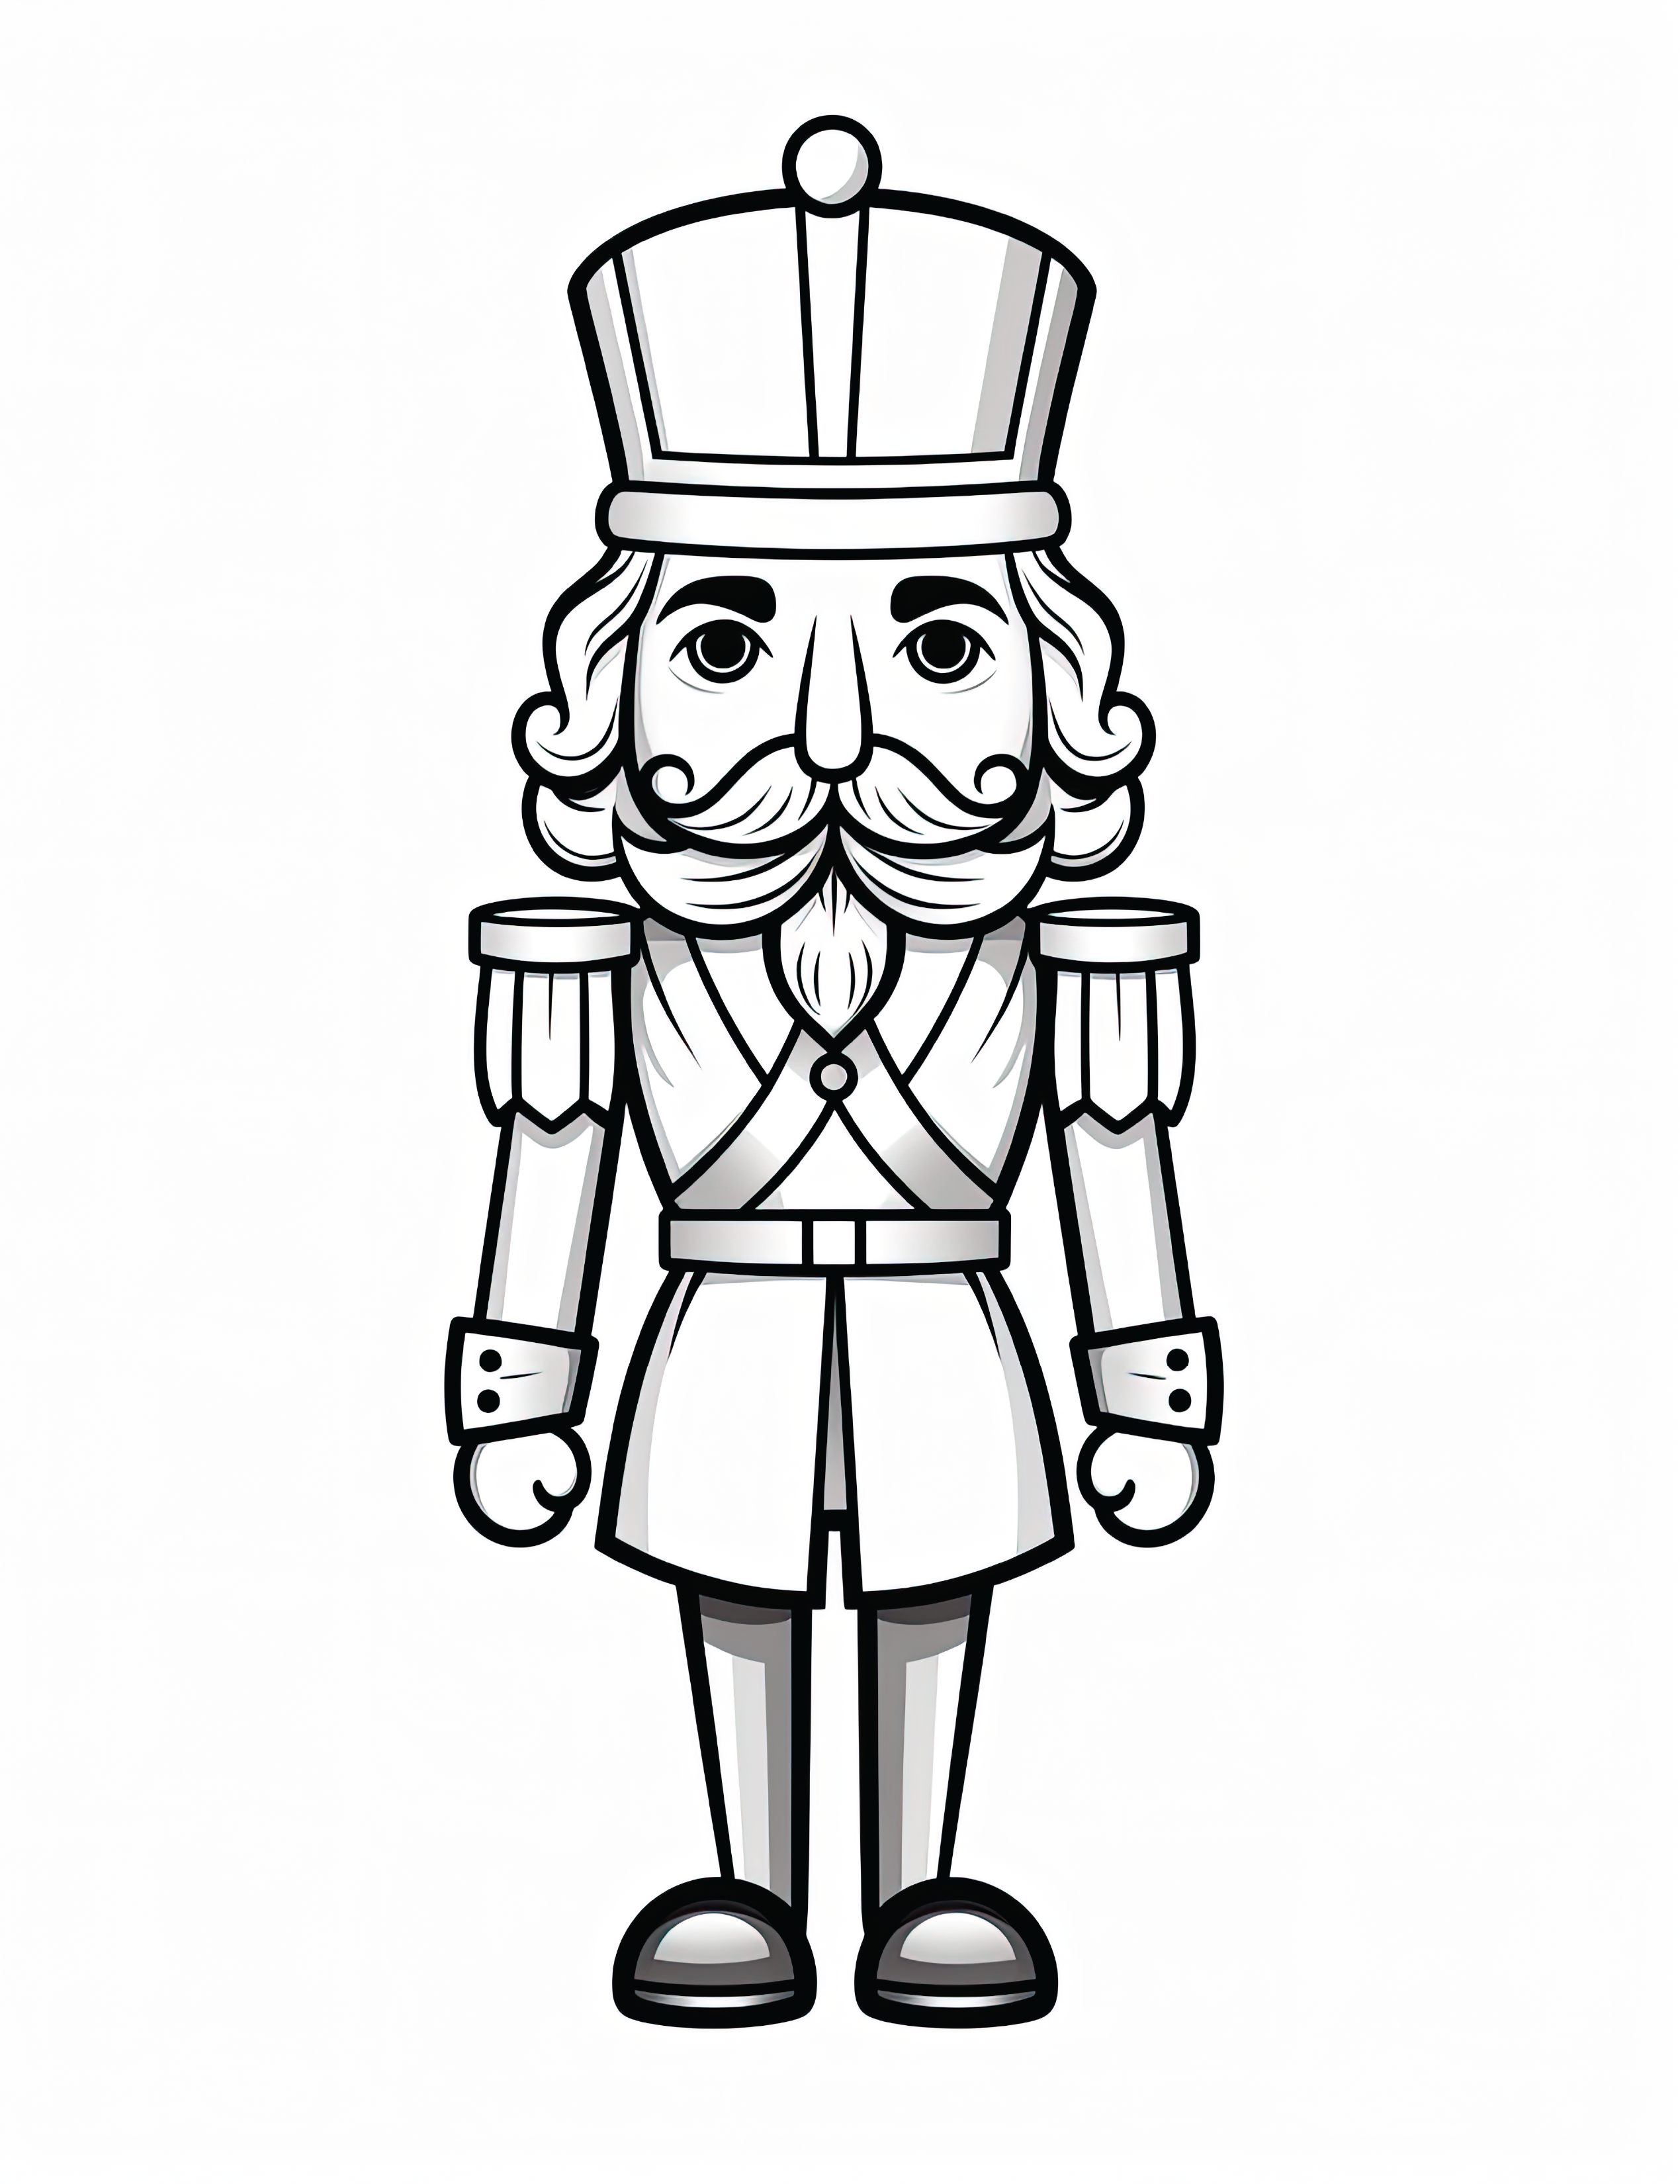 Marching Holiday Nutcracker Coloring Page